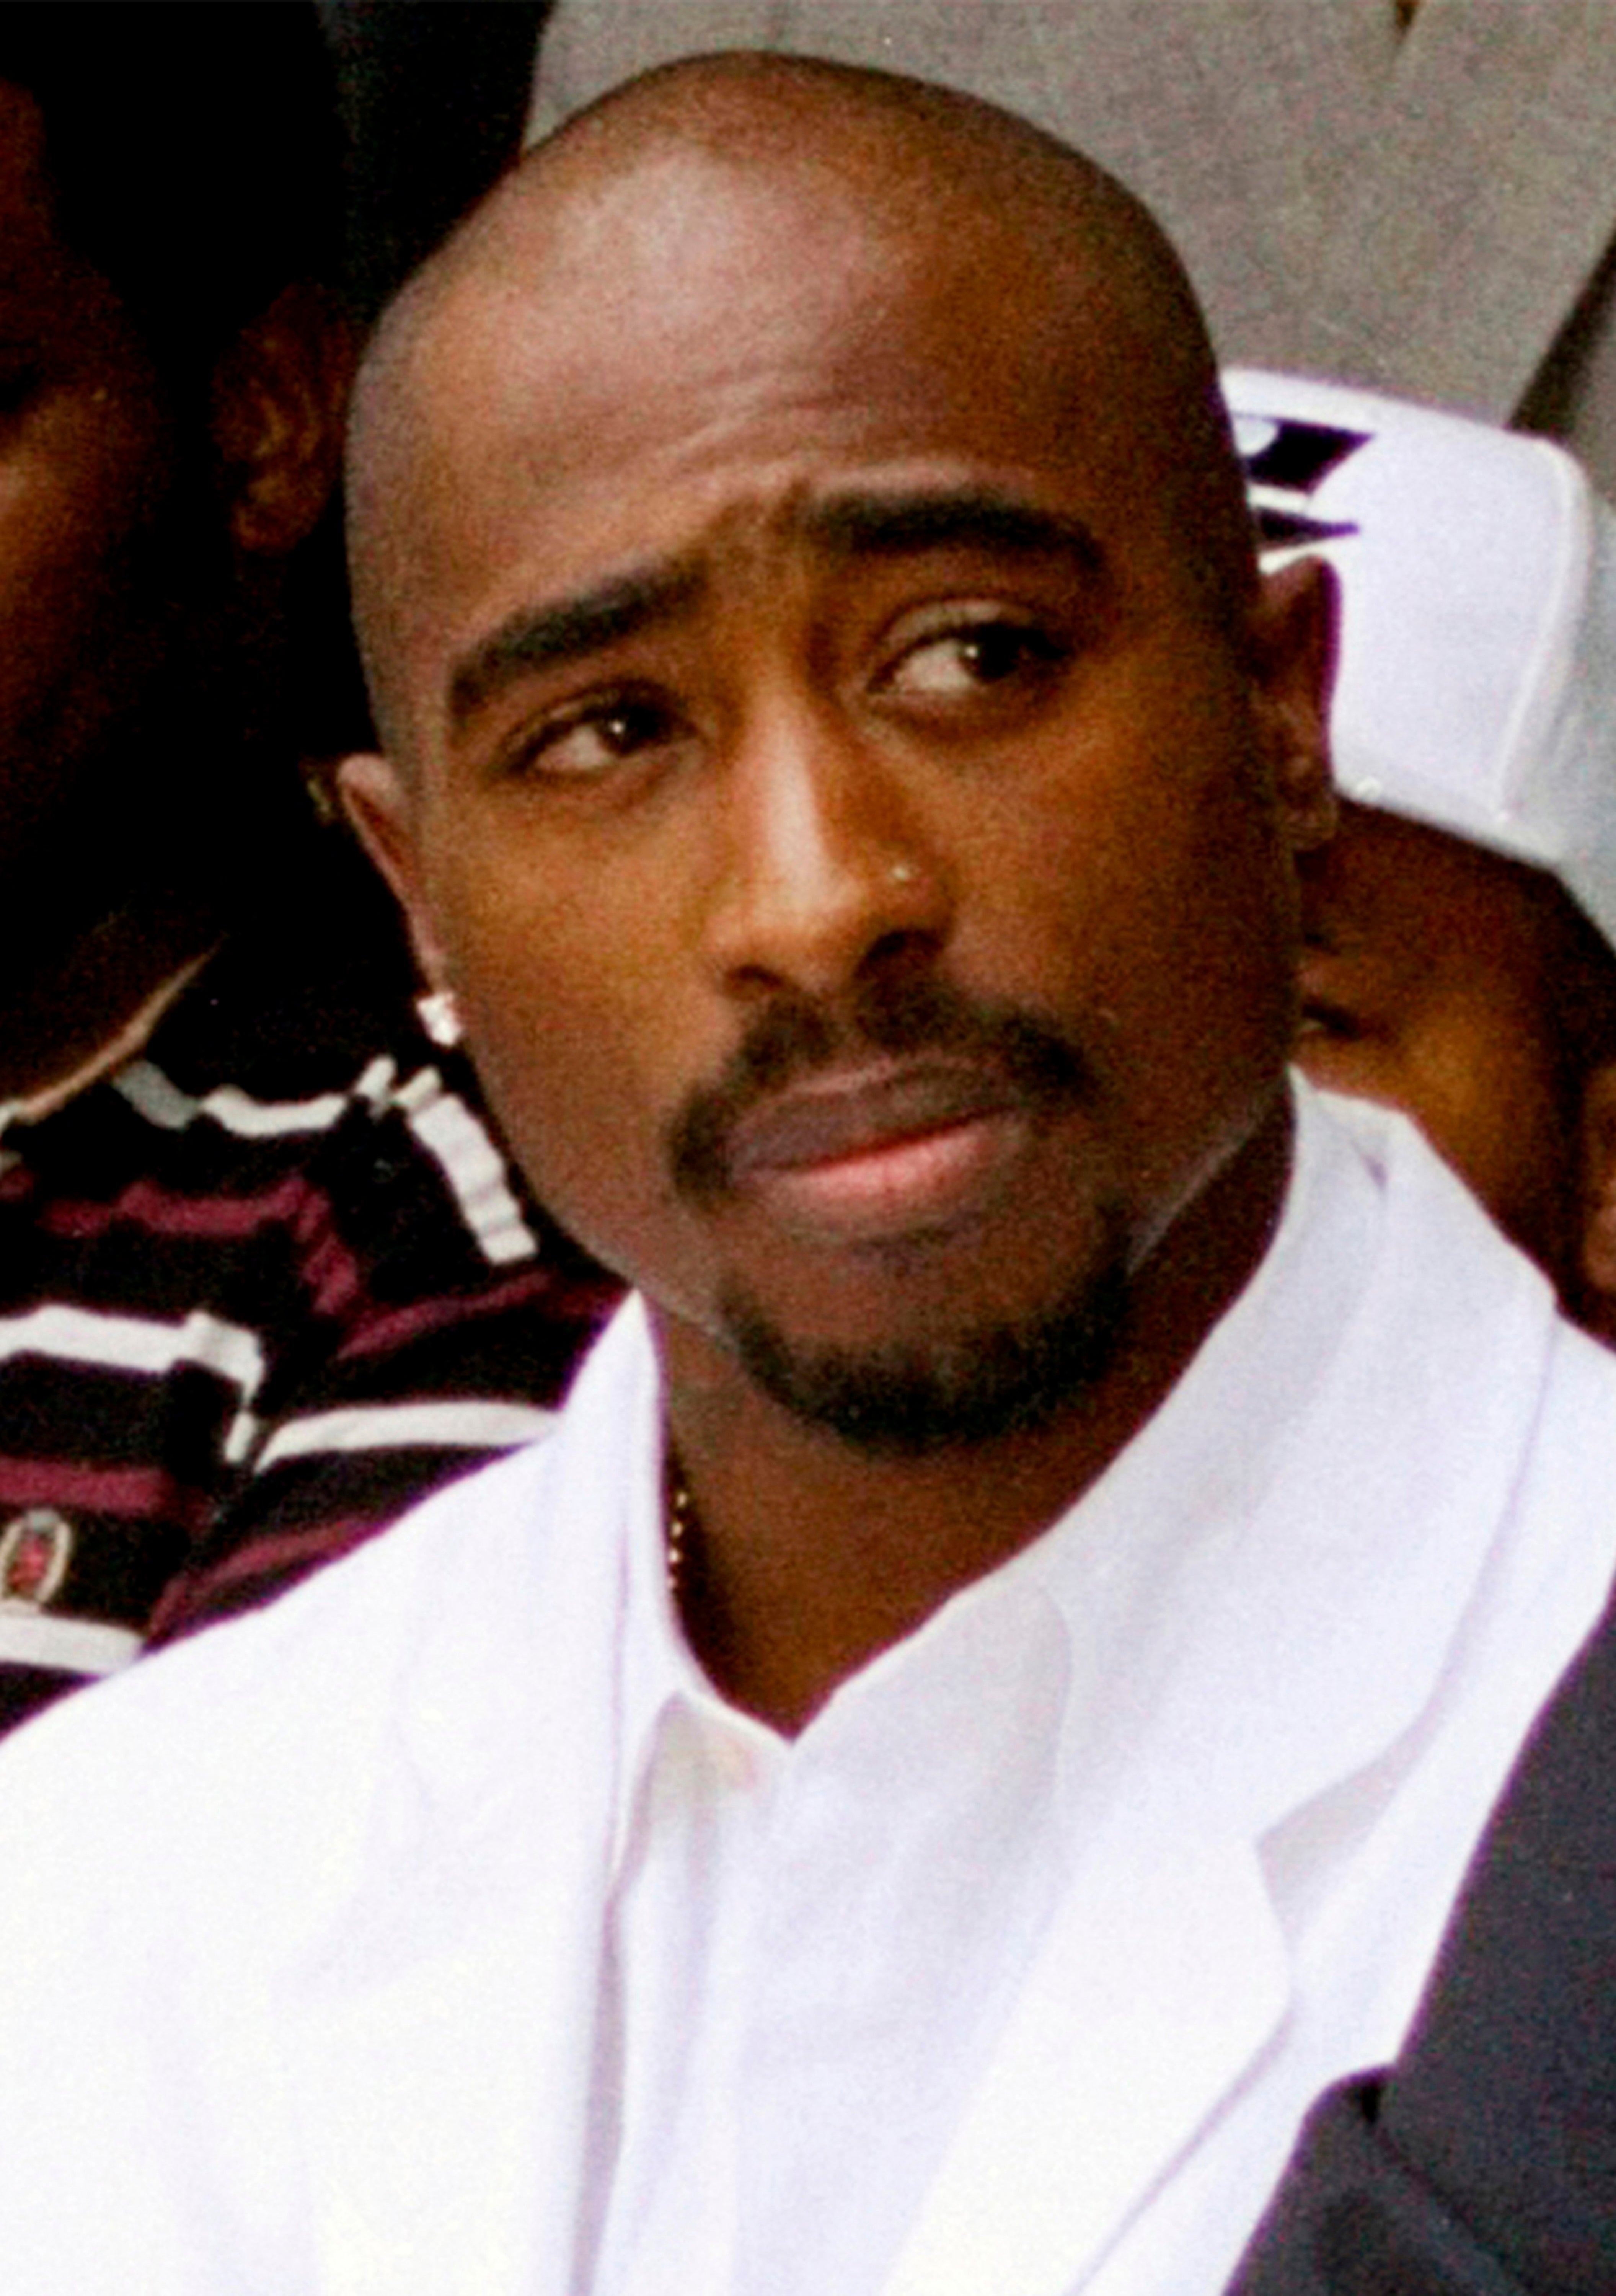 Rapper Tupac Shakur attends a voter registration event in South Central Los Angeles in August 1996